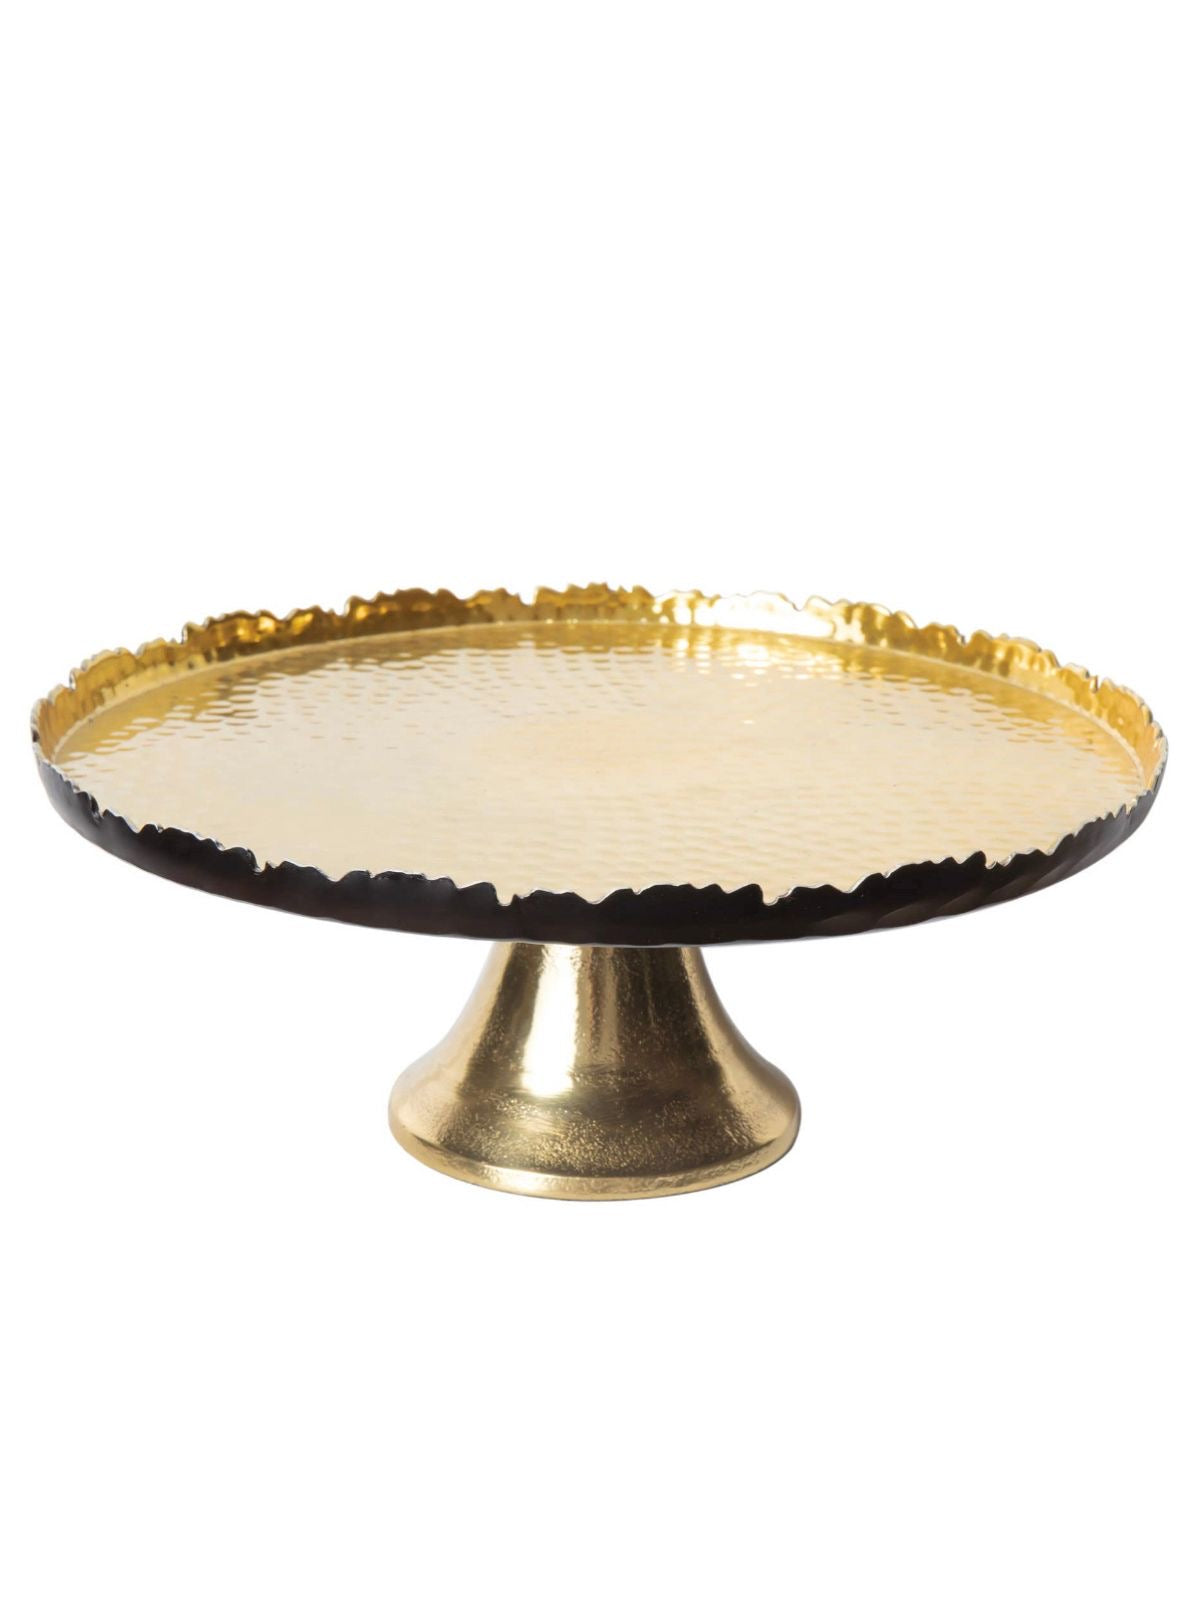 11D Black and Gold Stainless Steel Footed Cake Stand, Sold by KYA Home Decor. 